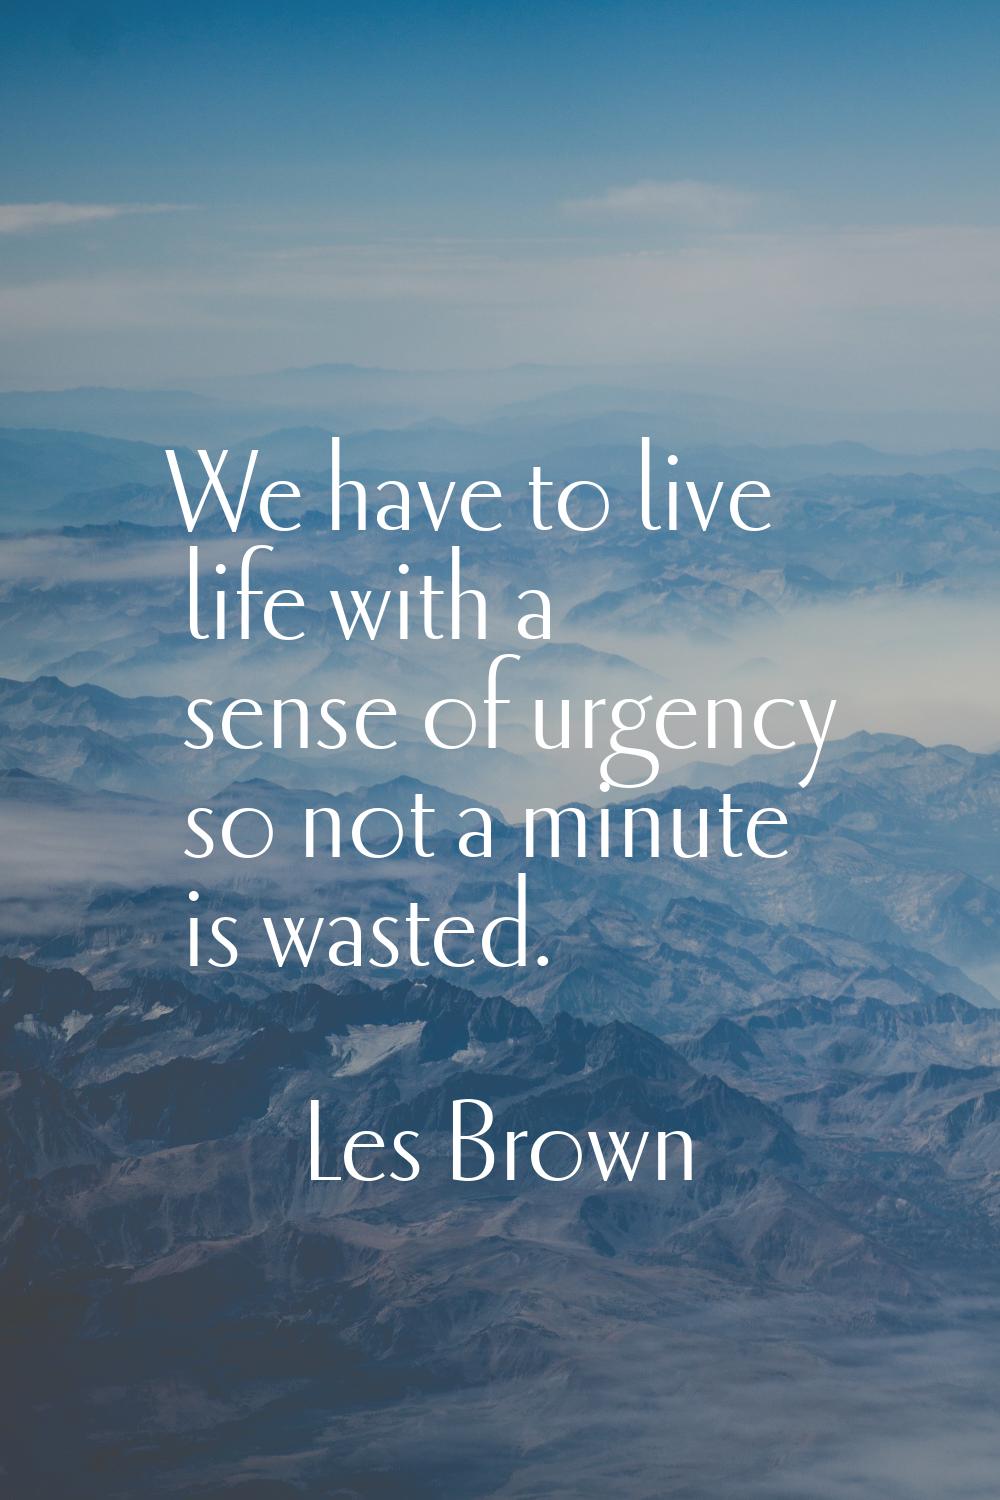 We have to live life with a sense of urgency so not a minute is wasted.